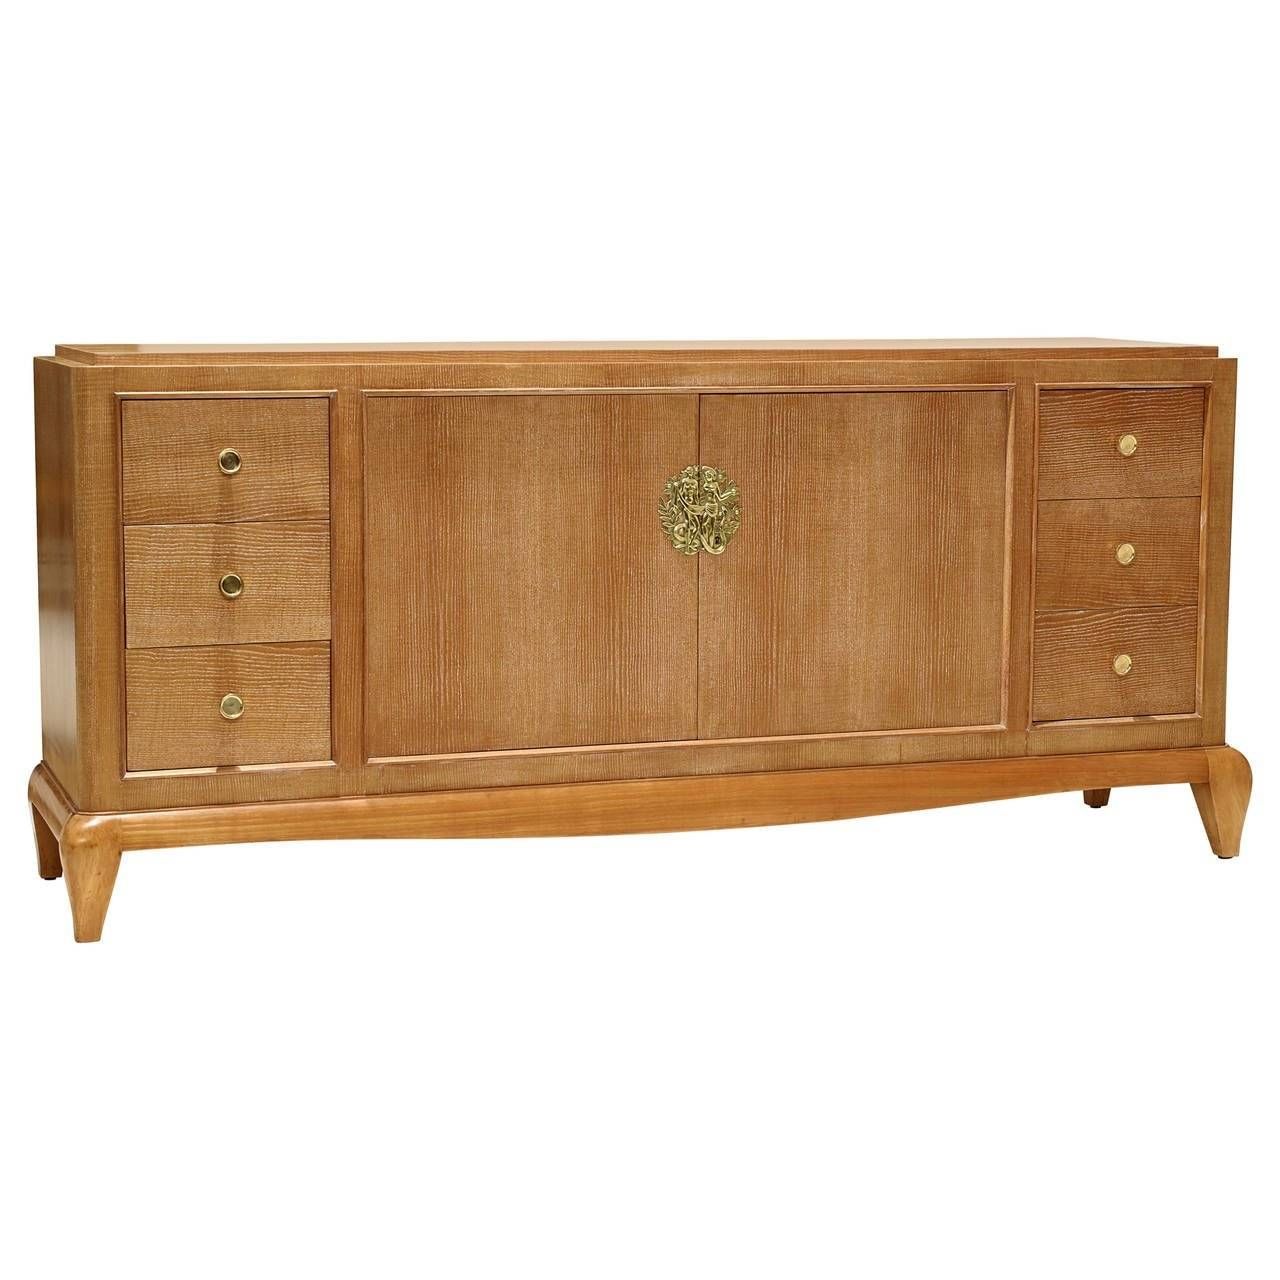 Sideboard In Limed Oak And Beechandré Arbus For Sale At 1stdibs Throughout Beech Sideboards (View 19 of 30)